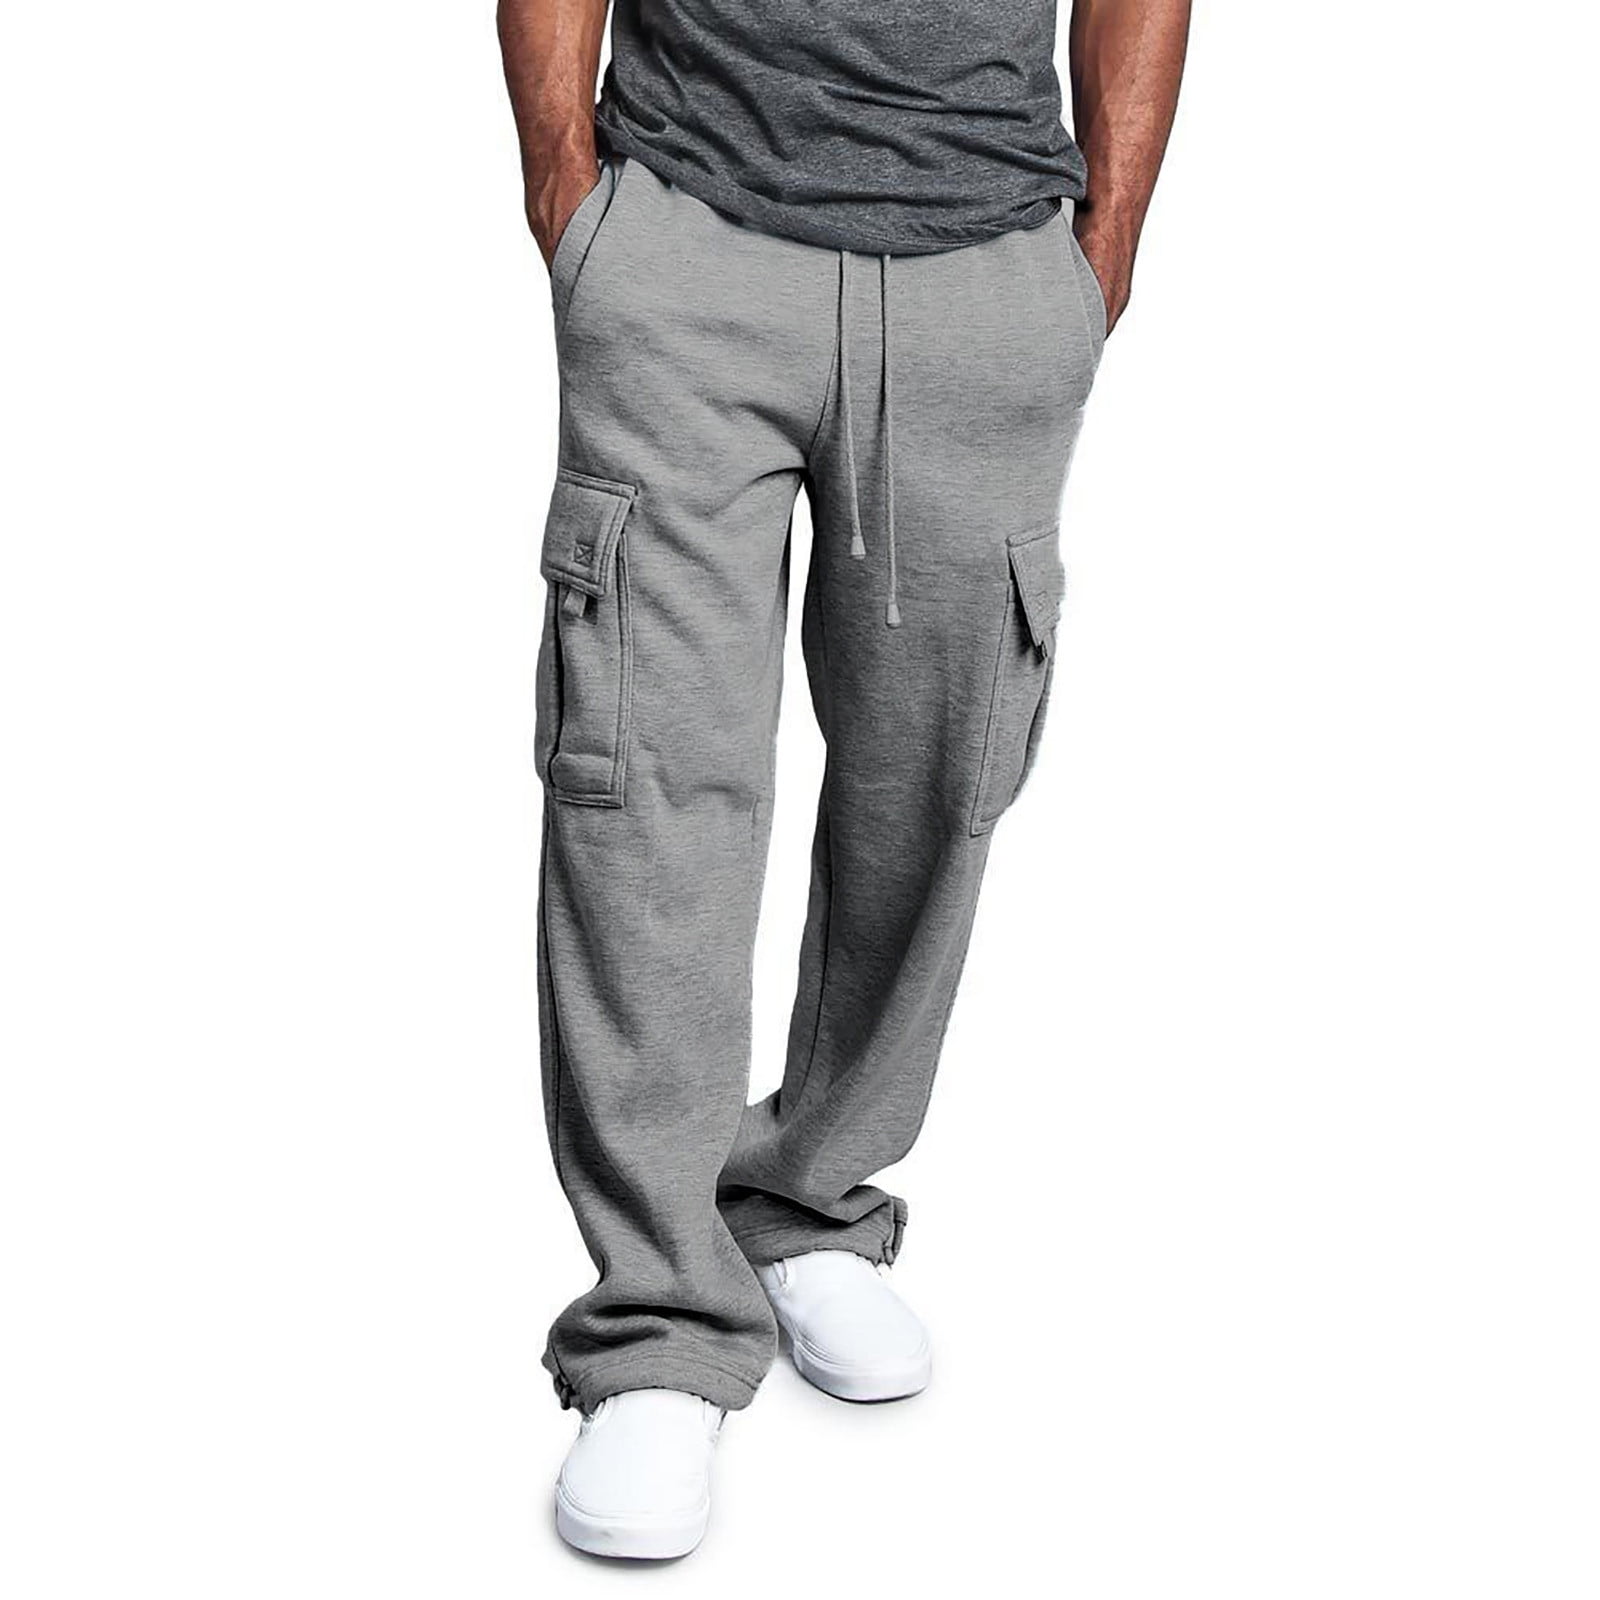 Mens Sweatpants Joggers Baggy Black Pants Heavyweight Relaxed Fit